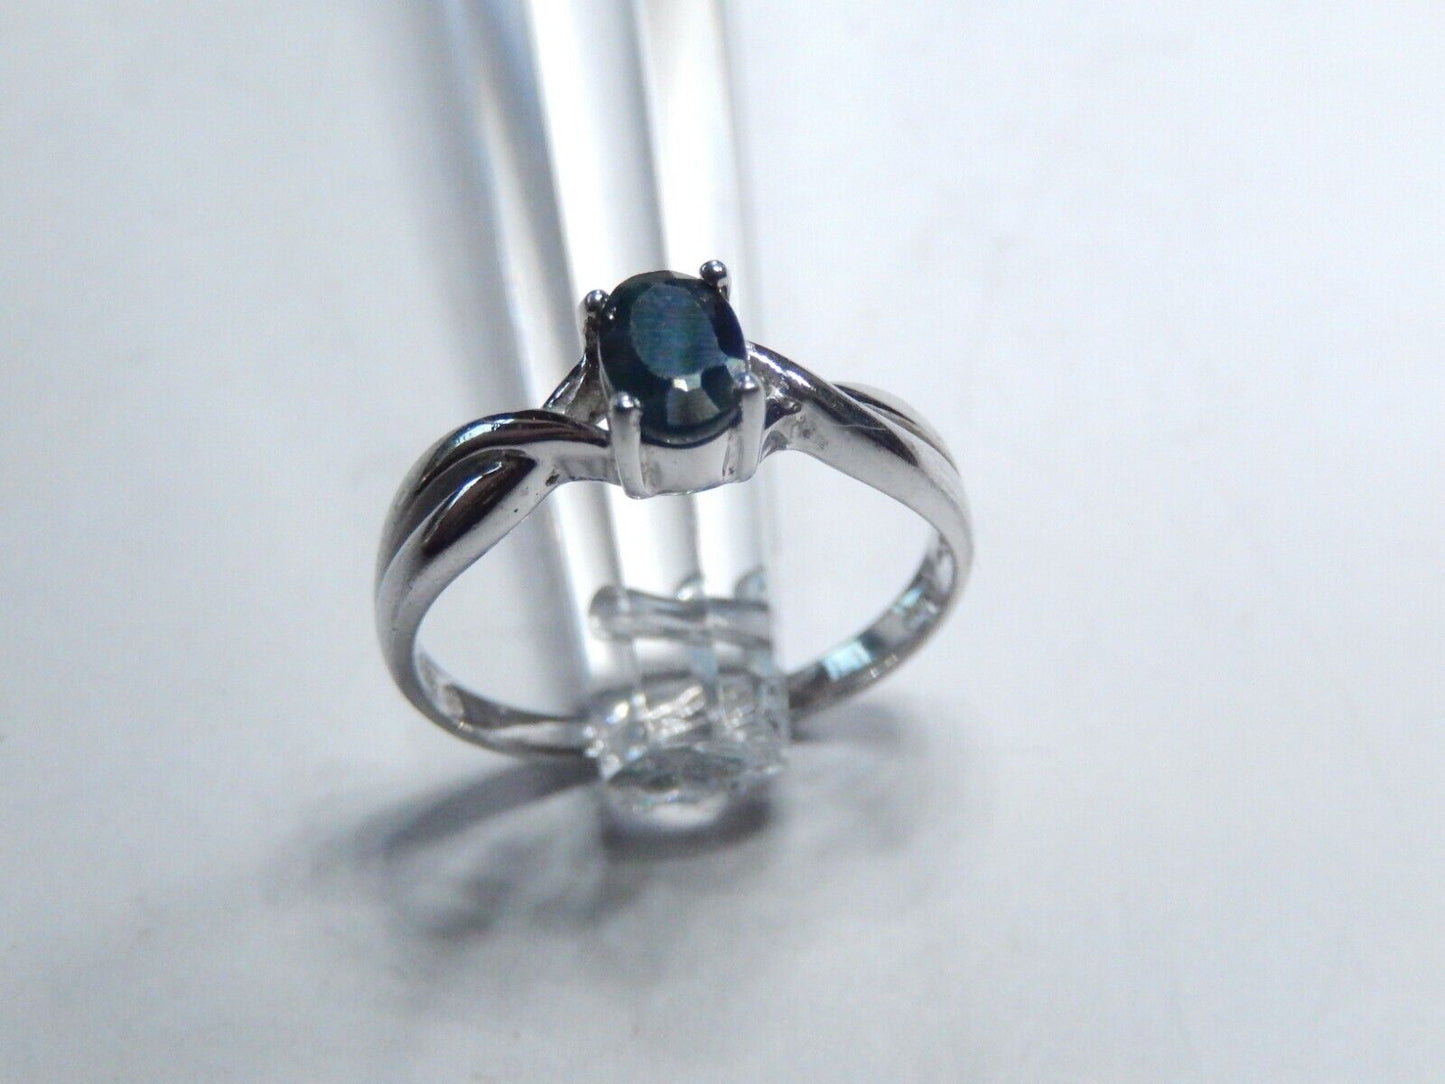 Vintage Ross Simons Sterling Silver 925 Sapphire Solitaire Ring Size 7.25